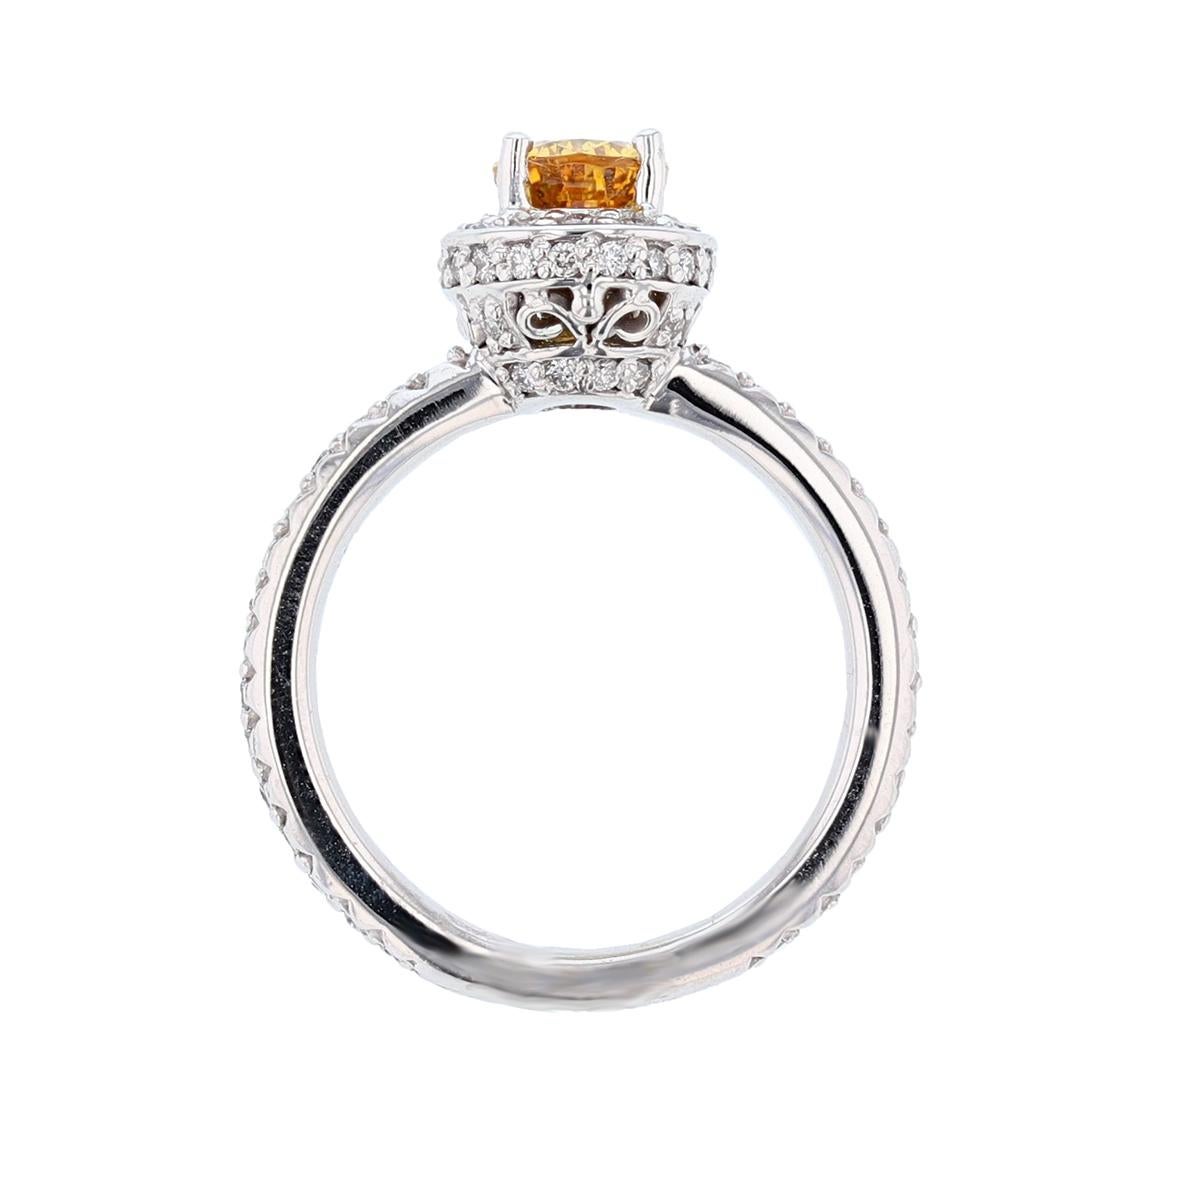 Contemporary 14 Karat White Gold 1.40 Carat Pear Shaped Yellow Sapphire Diamond Ring For Sale